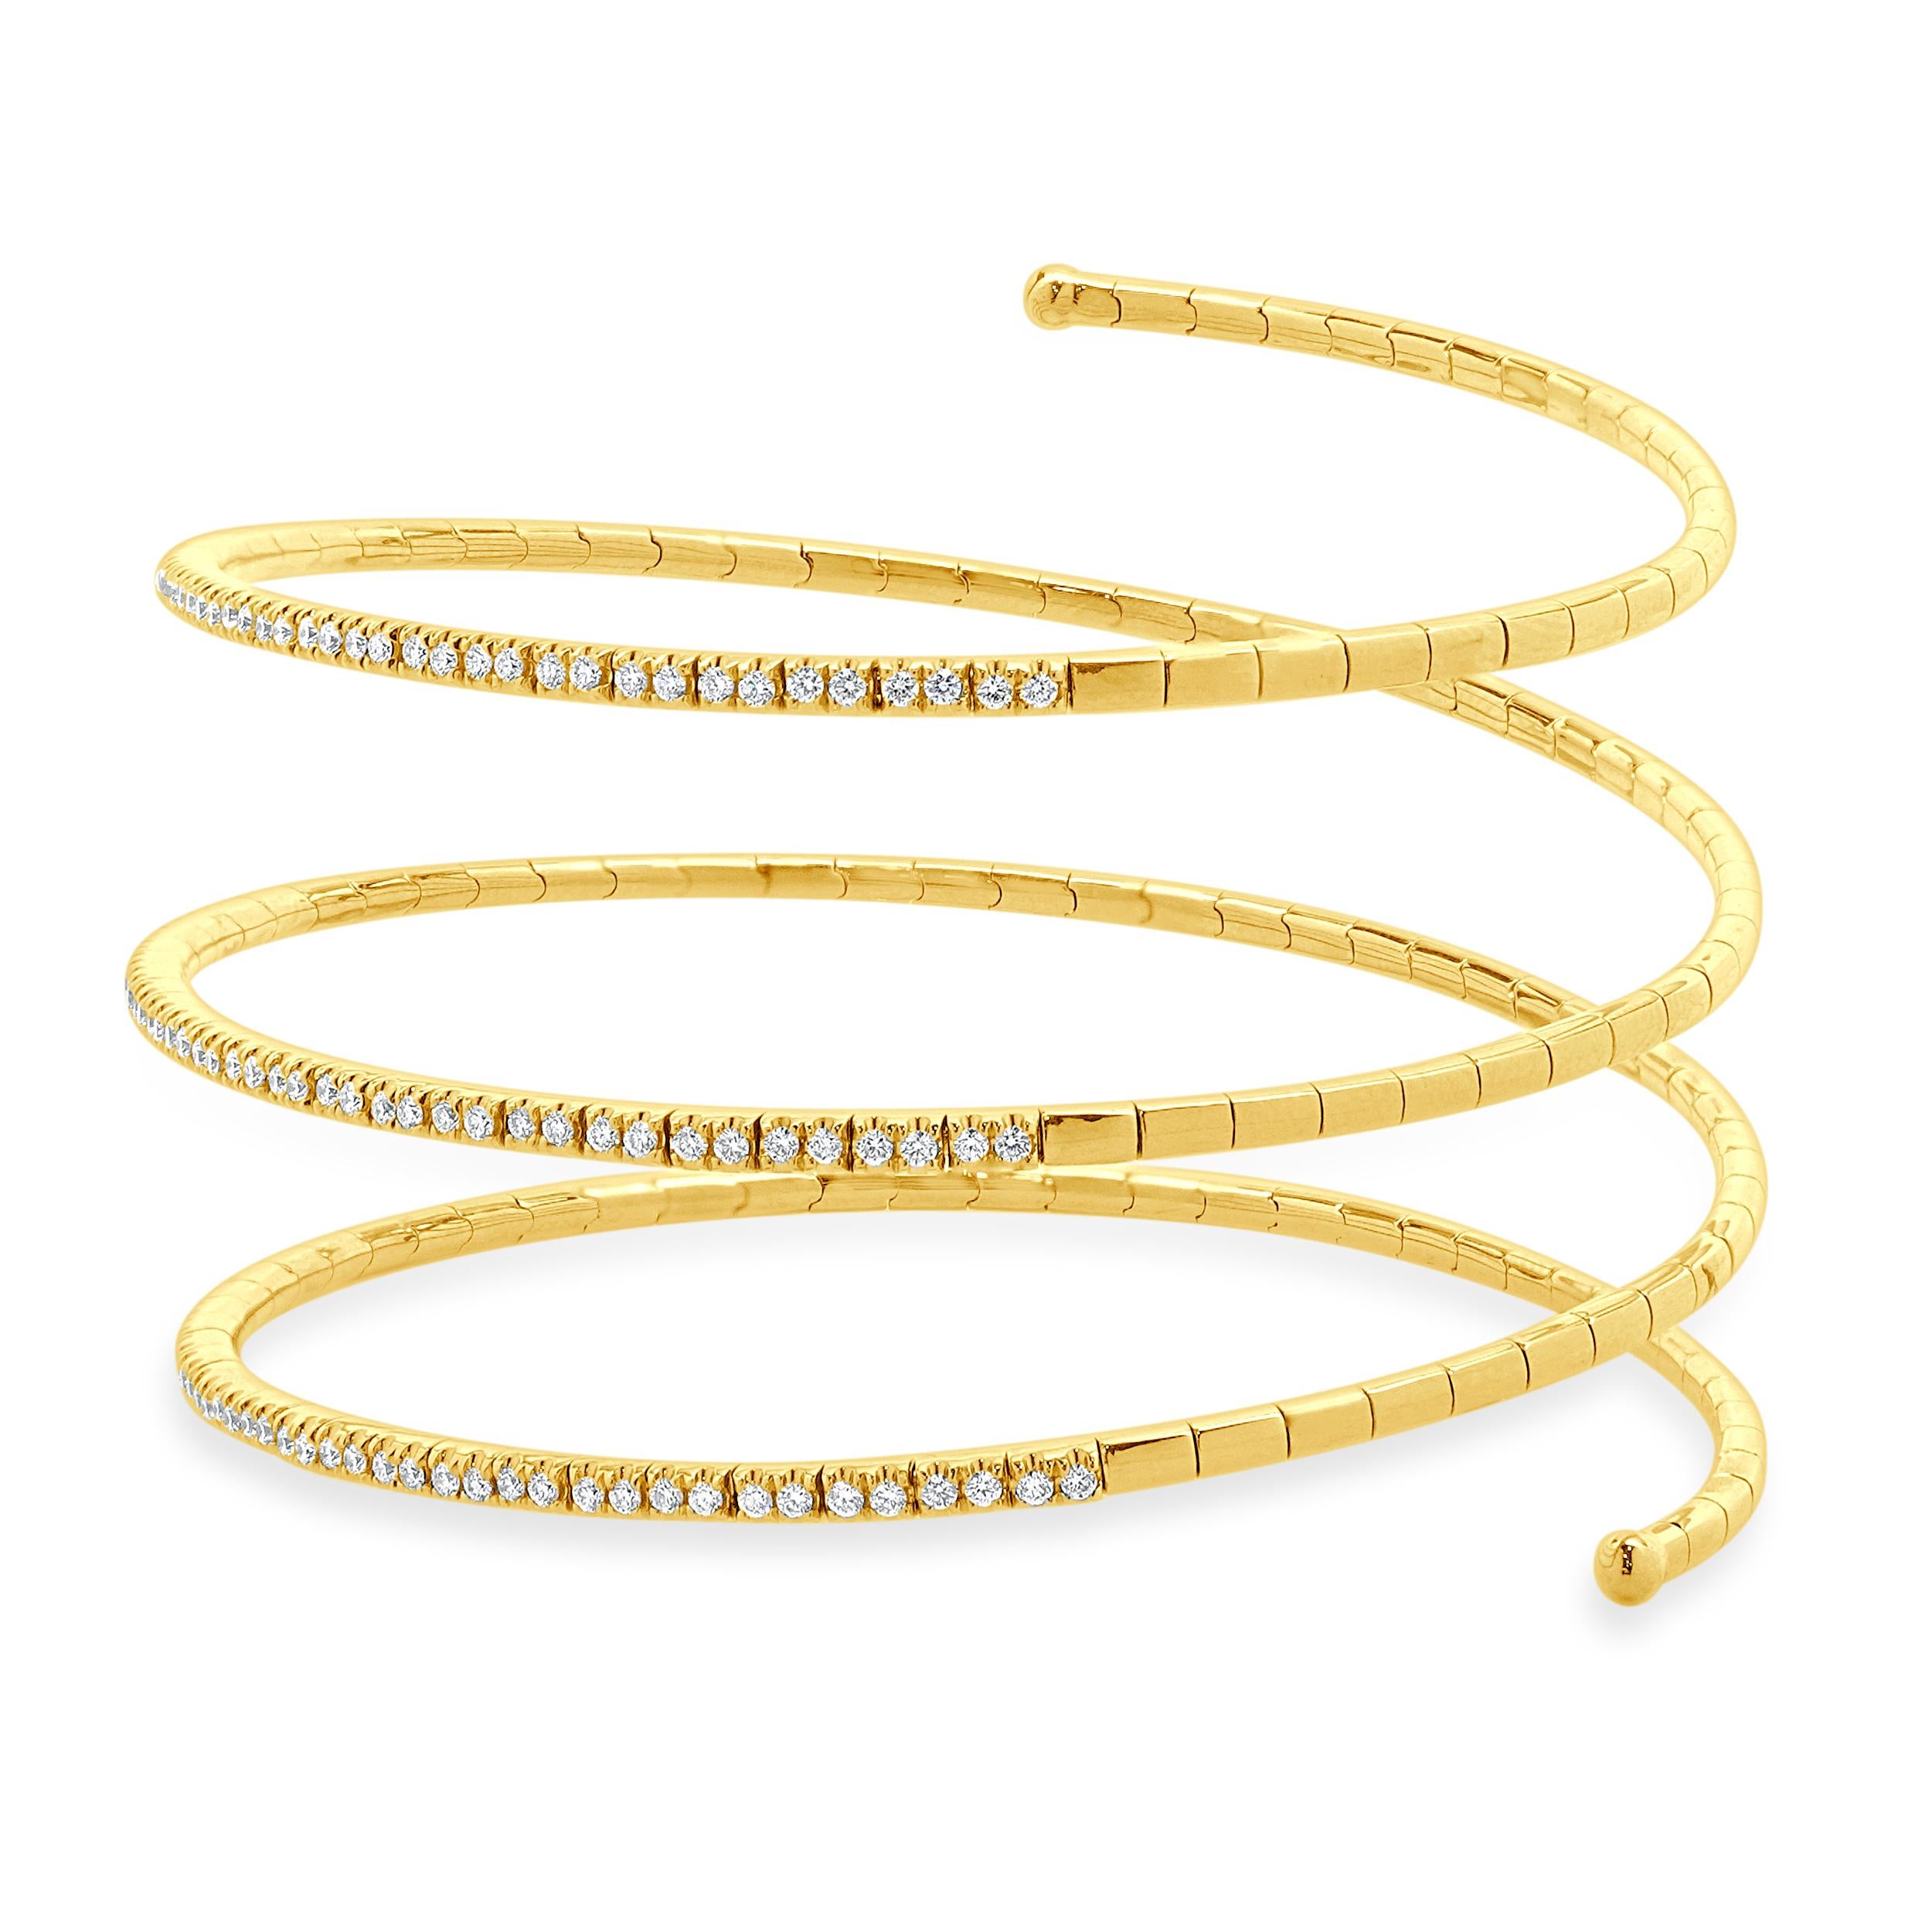 Designer: custom design
Material: 14K yellow Gold
Diamond: 156 round brilliant cut = 1.21cttw
Color: G
Clarity: VS1-2
Dimensions: bracelet will fit up to a 7-inch wrist
Weight: 24.54 grams
